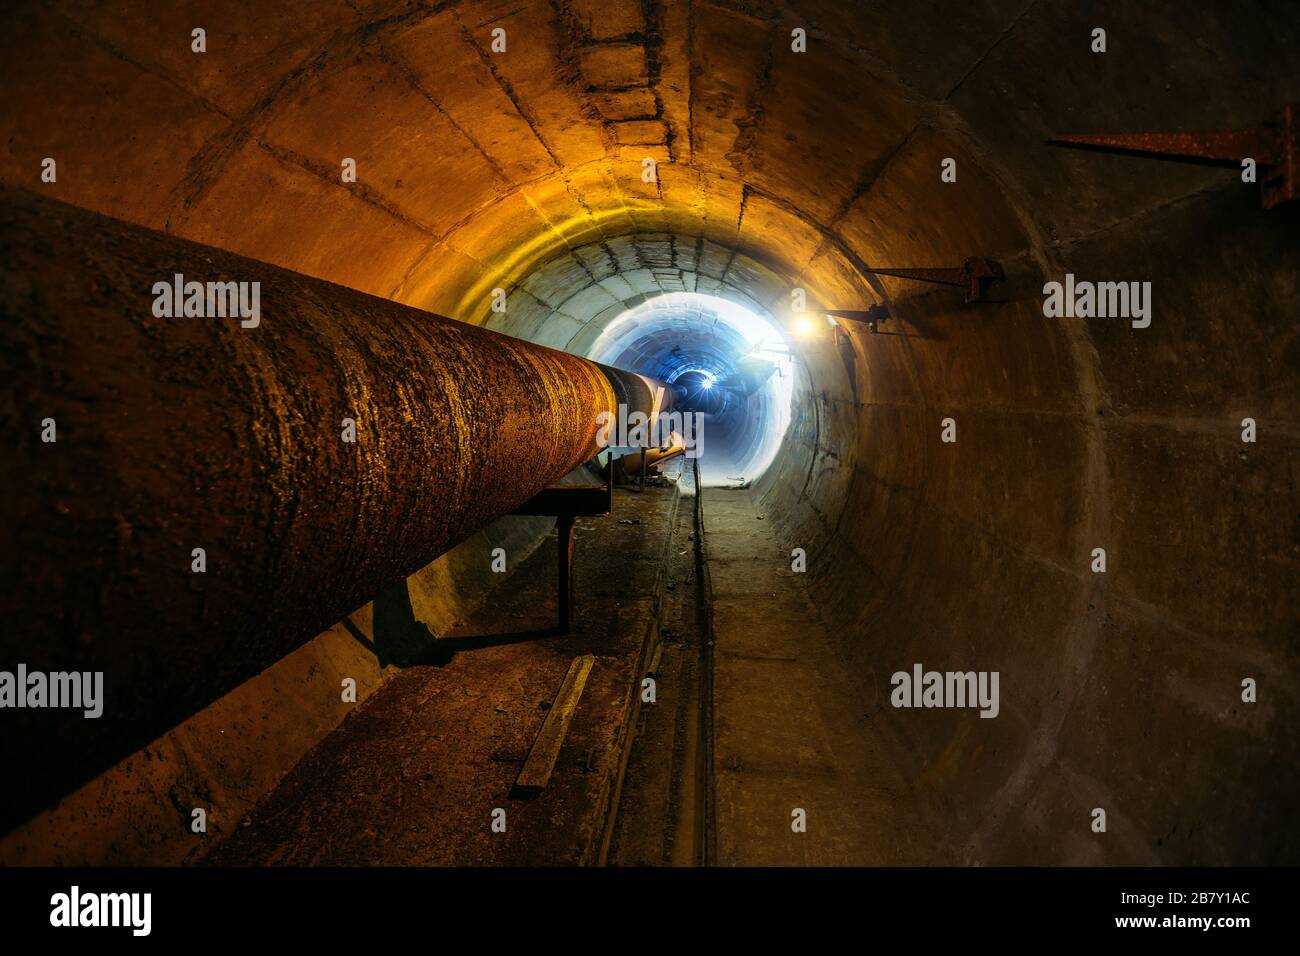 Round concrete underground tunnel of heating duct system with rusty pipes Stock Photo